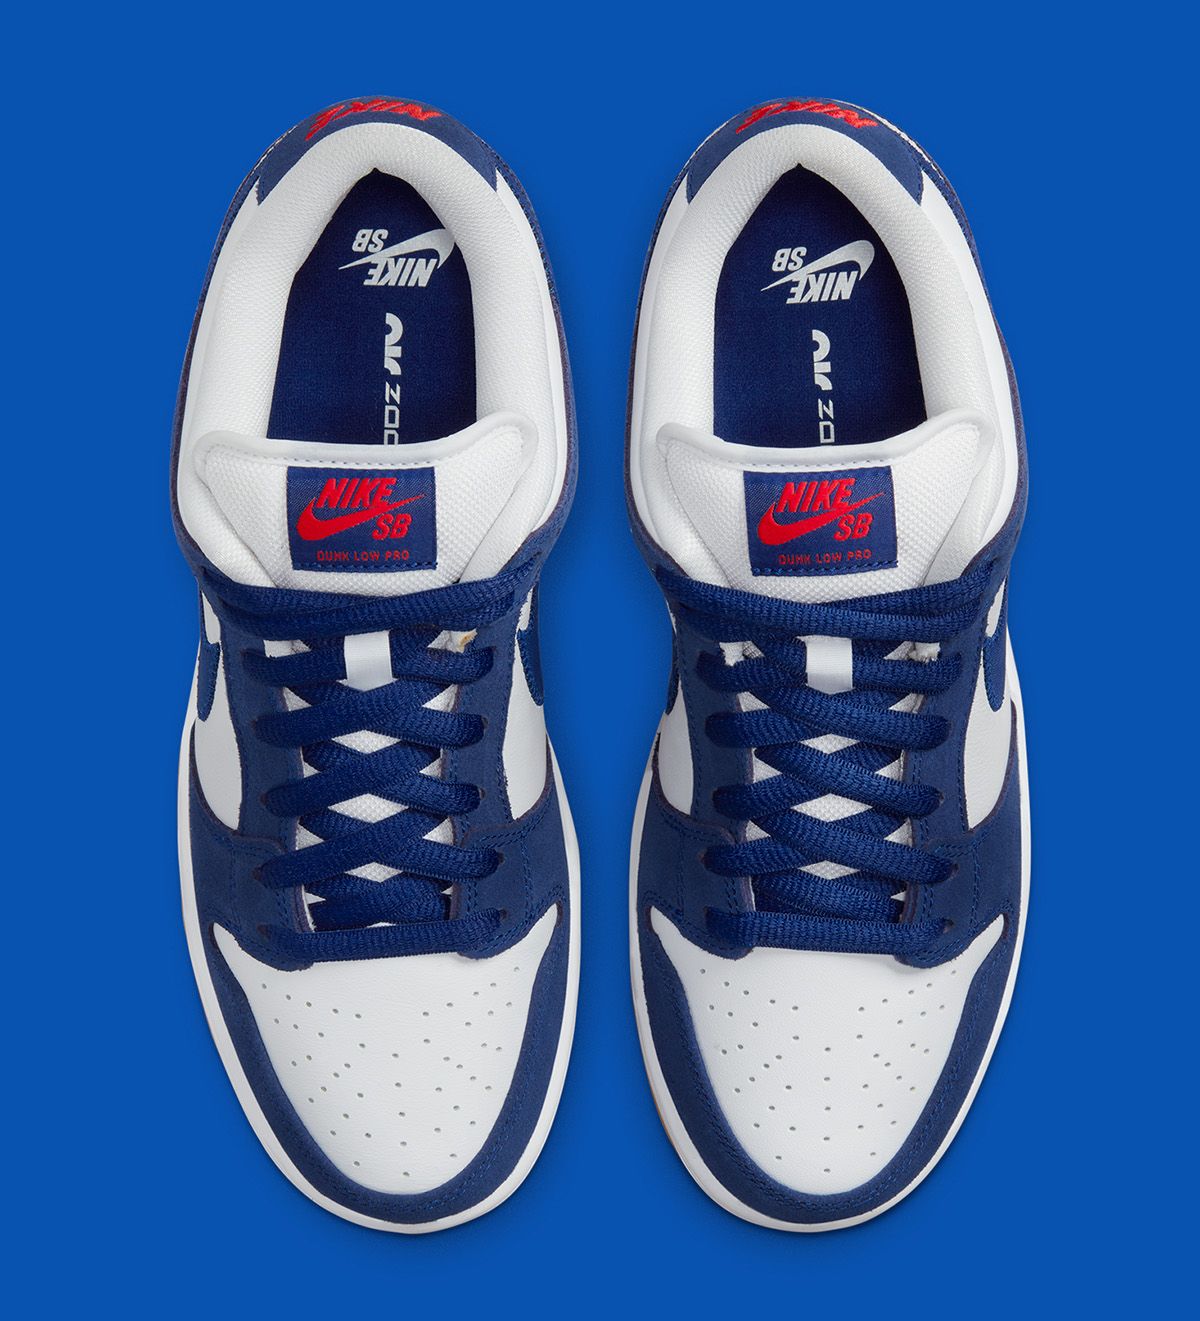 Where to Buy the Nike SB Dunk Low “Dodgers” | House of Heat°